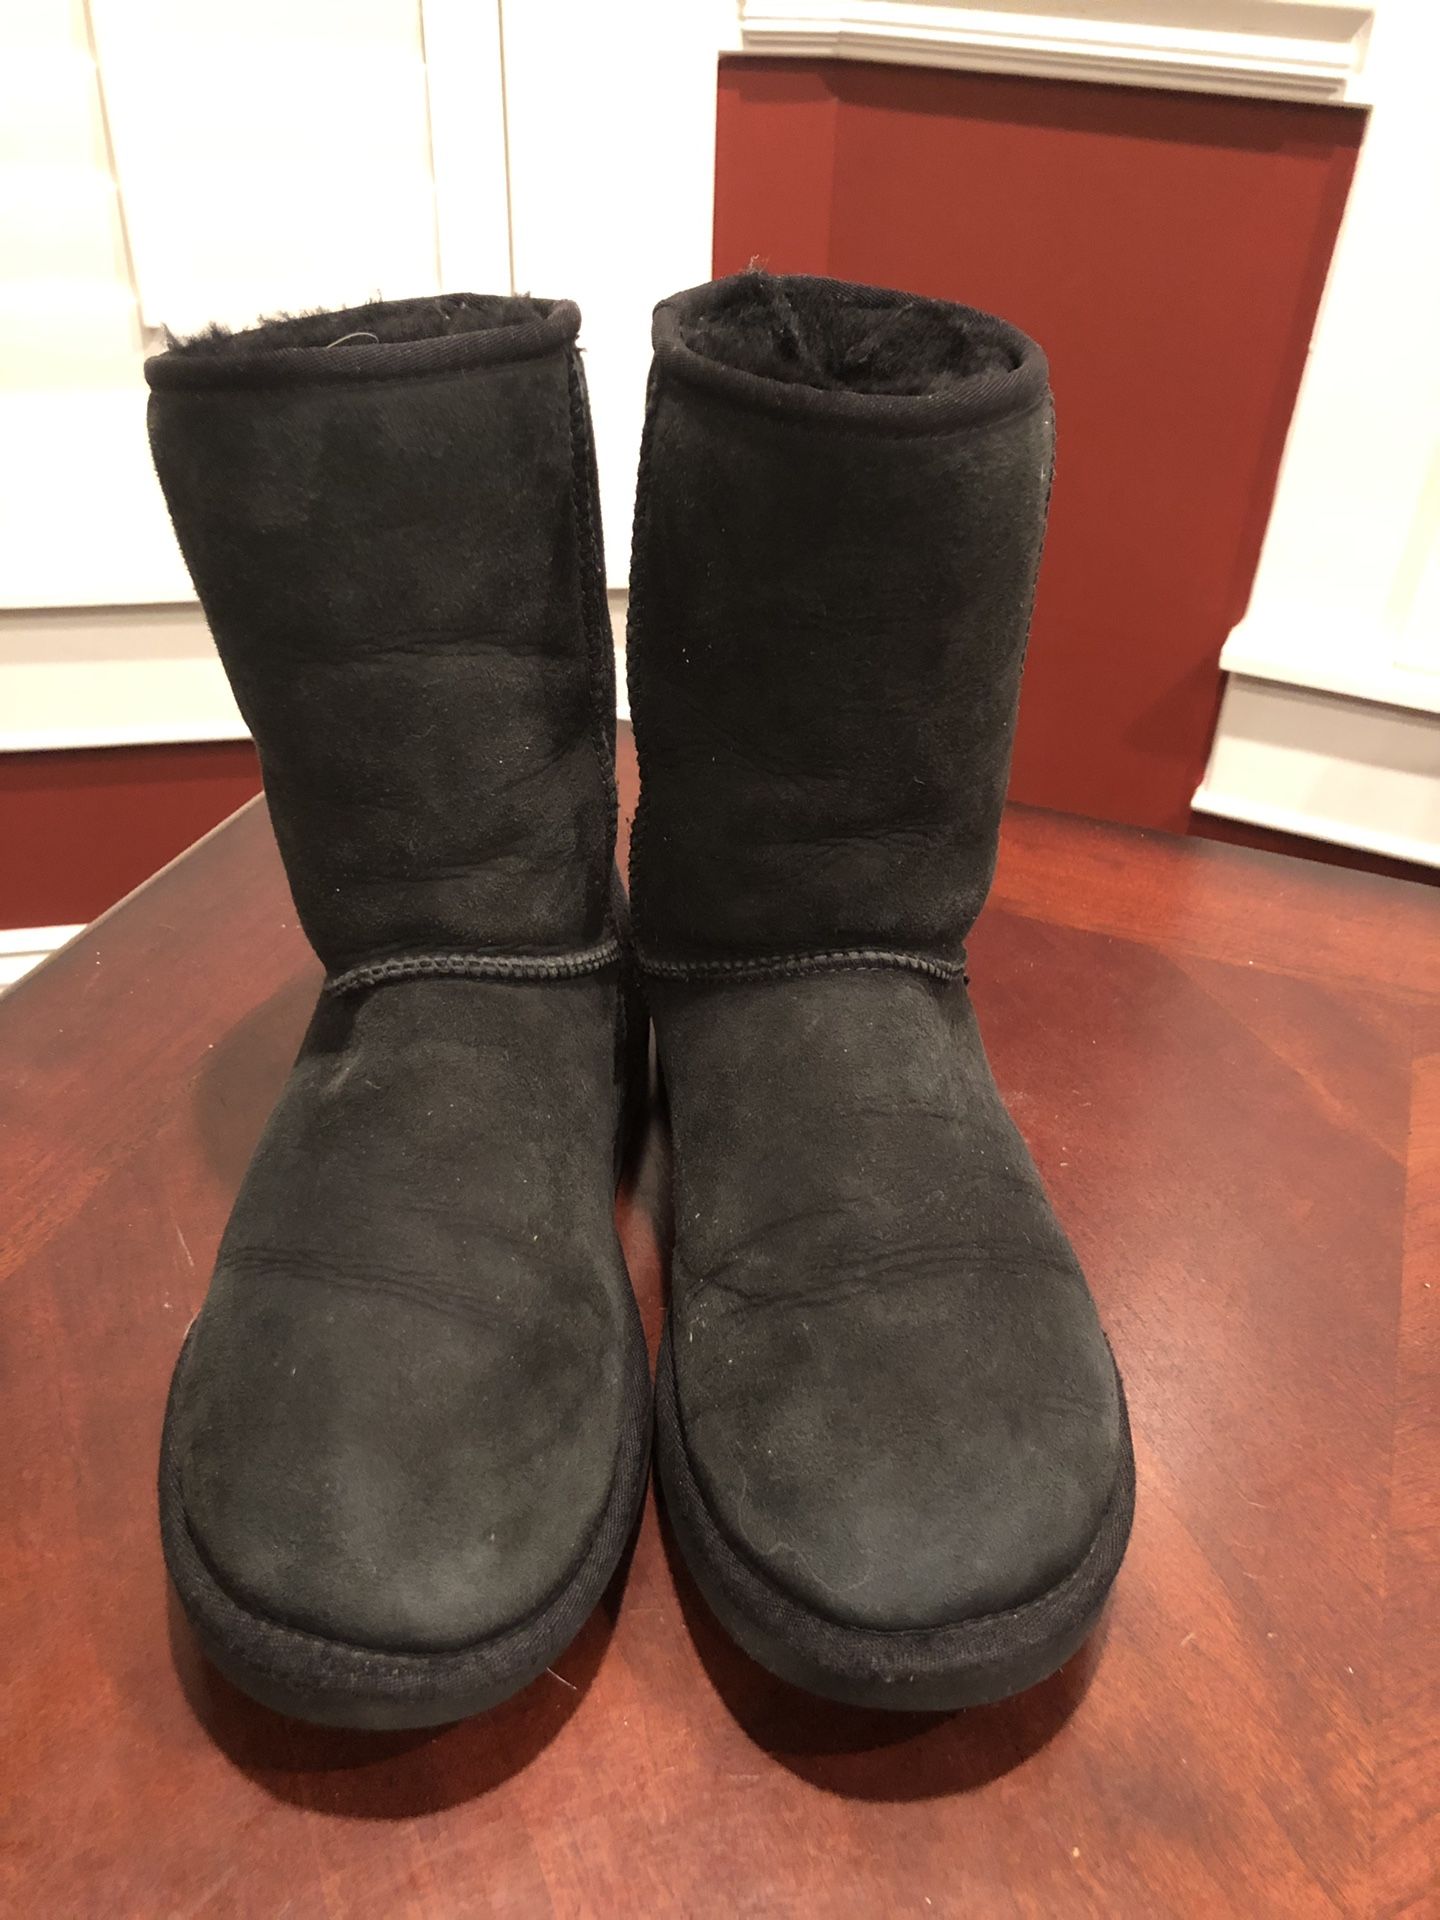 Adult Ugg Boots. Size 7